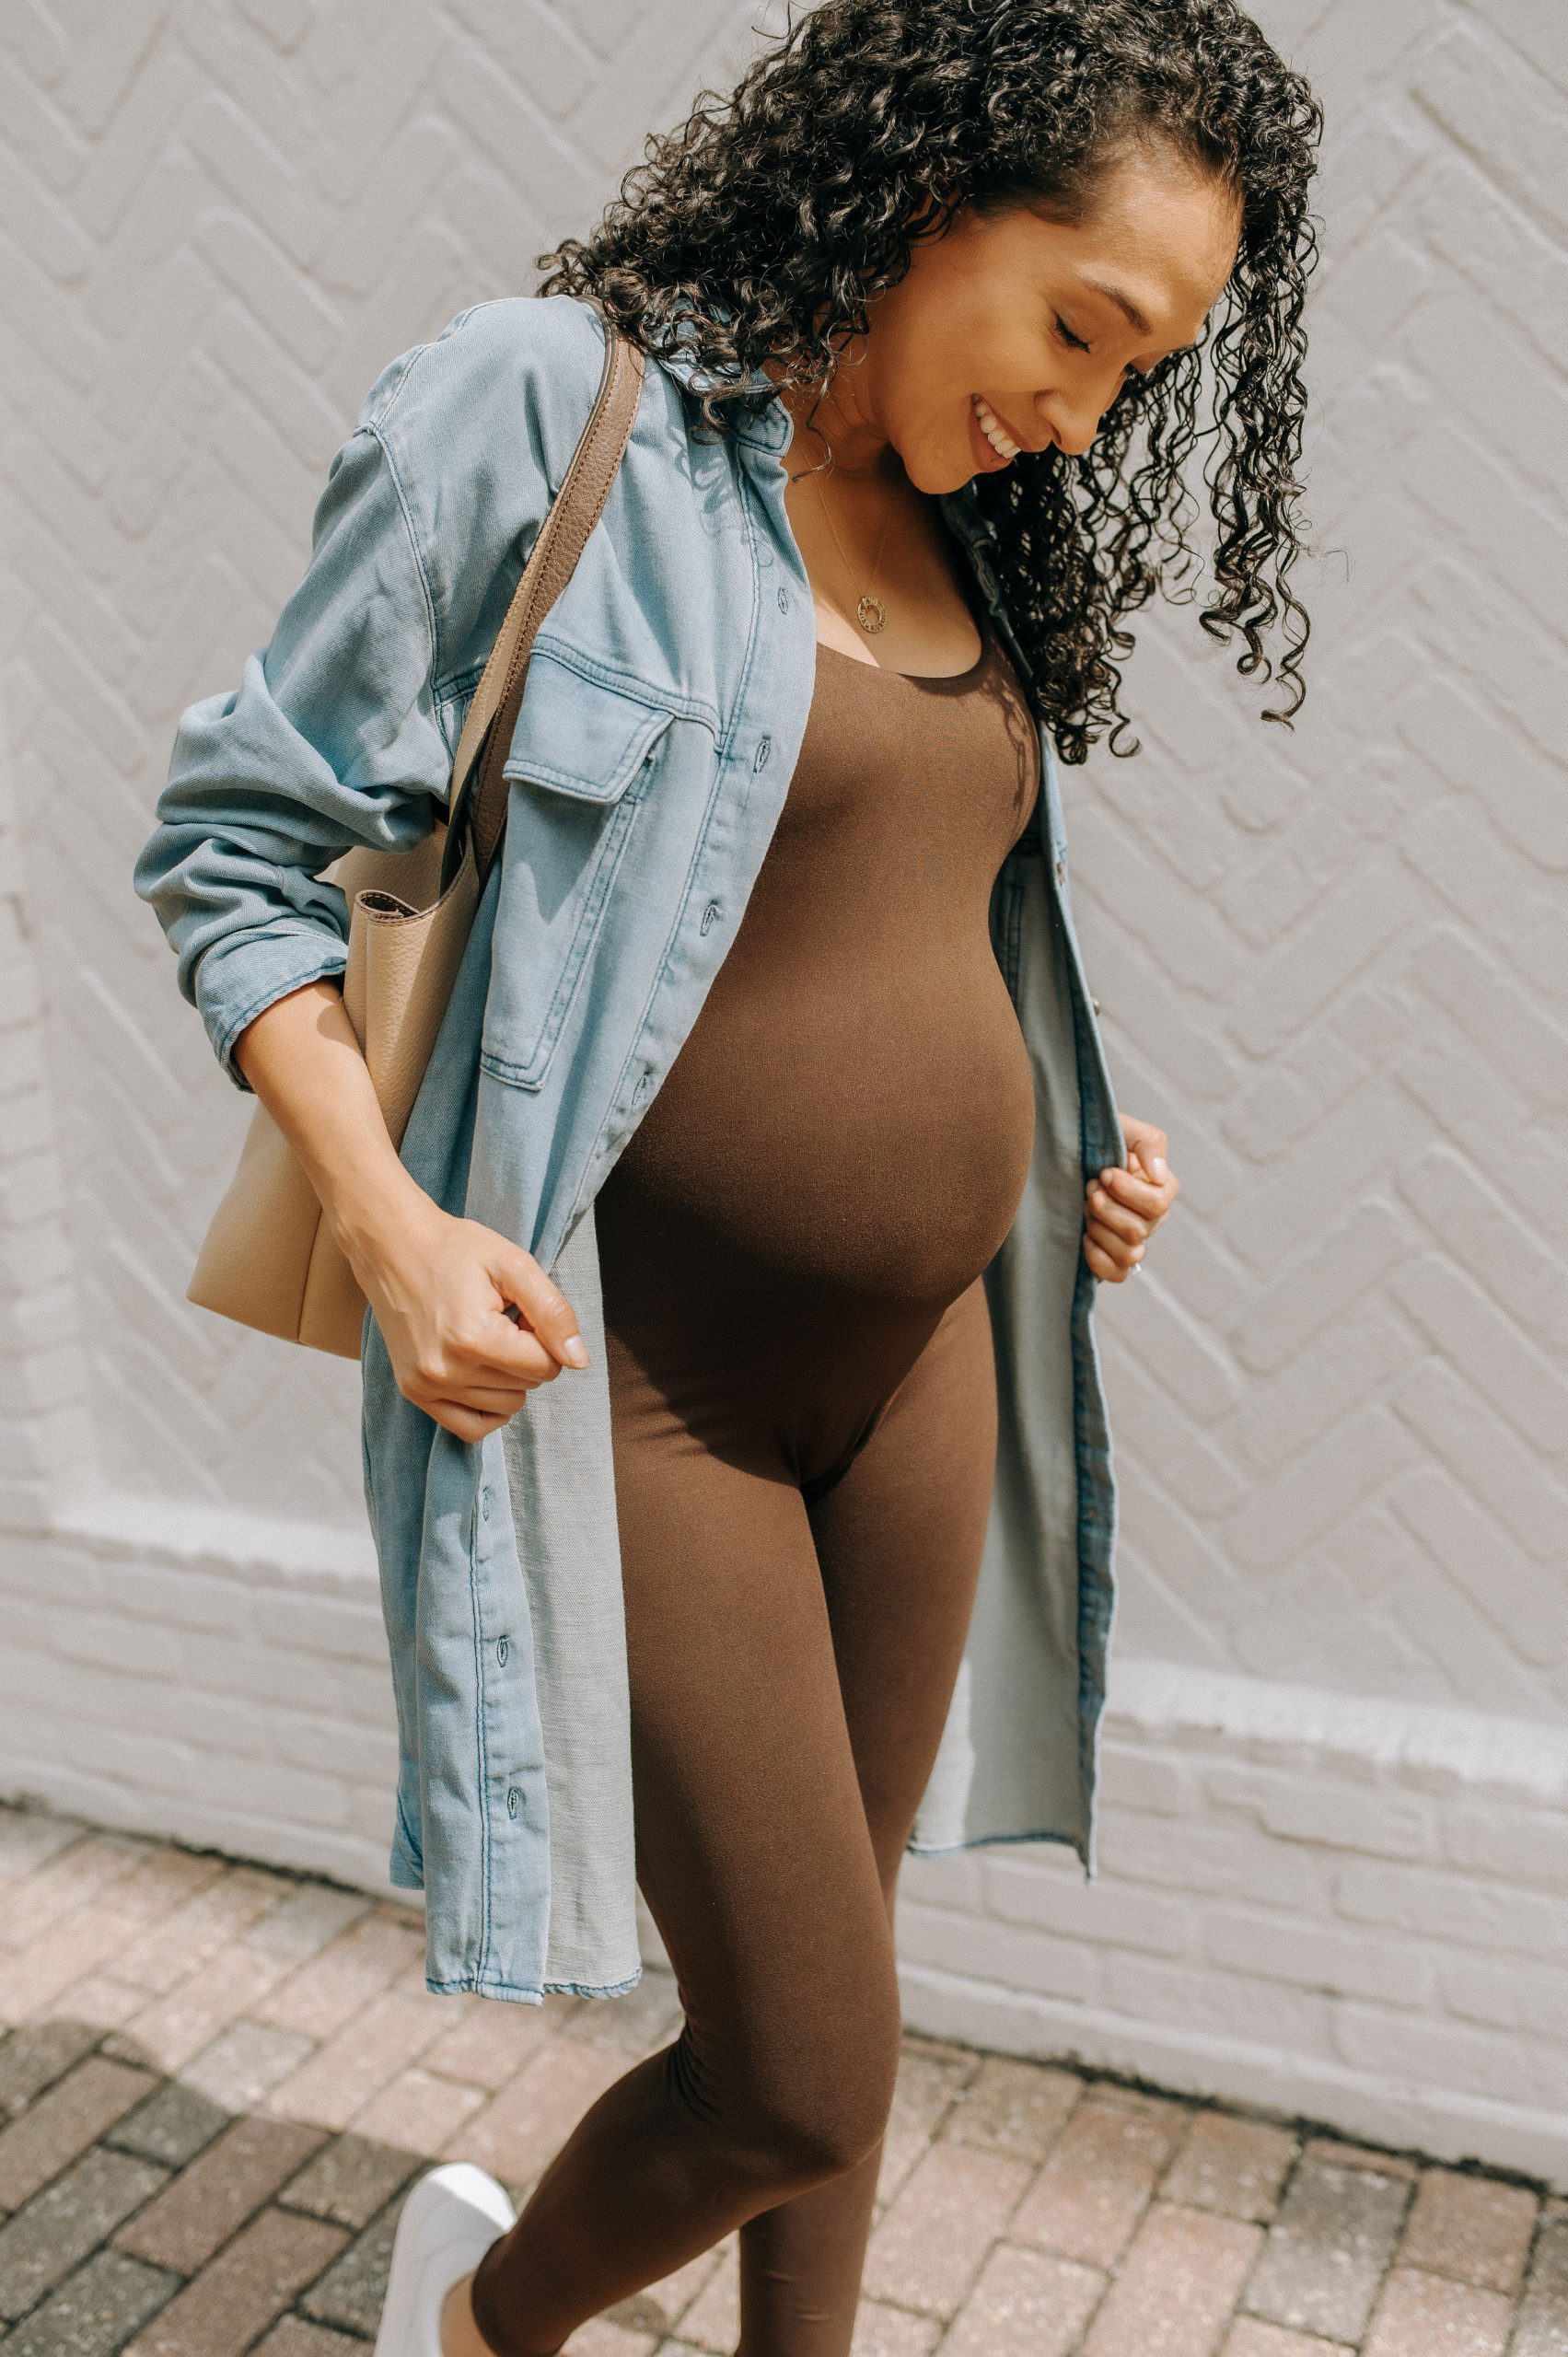 The Perfect Maternity Jumpsuit - Rocio Isabel